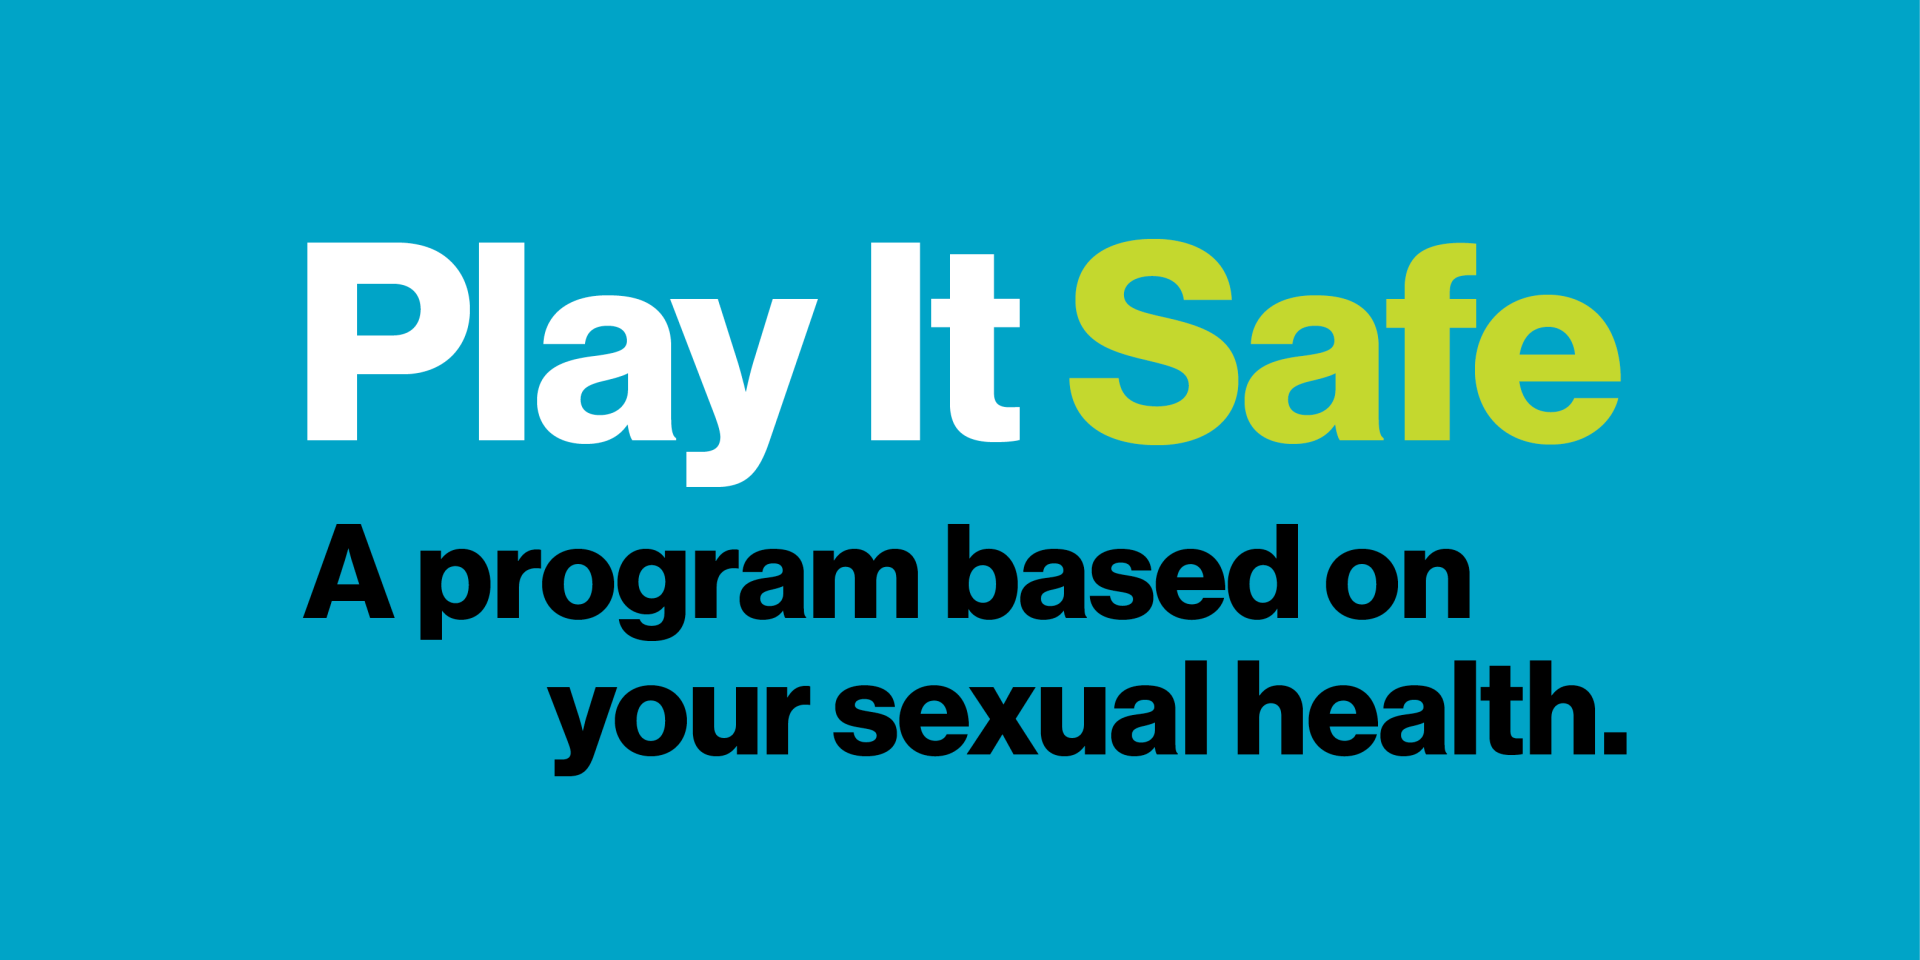 Play It Safe A Program Based on your Sexual Health